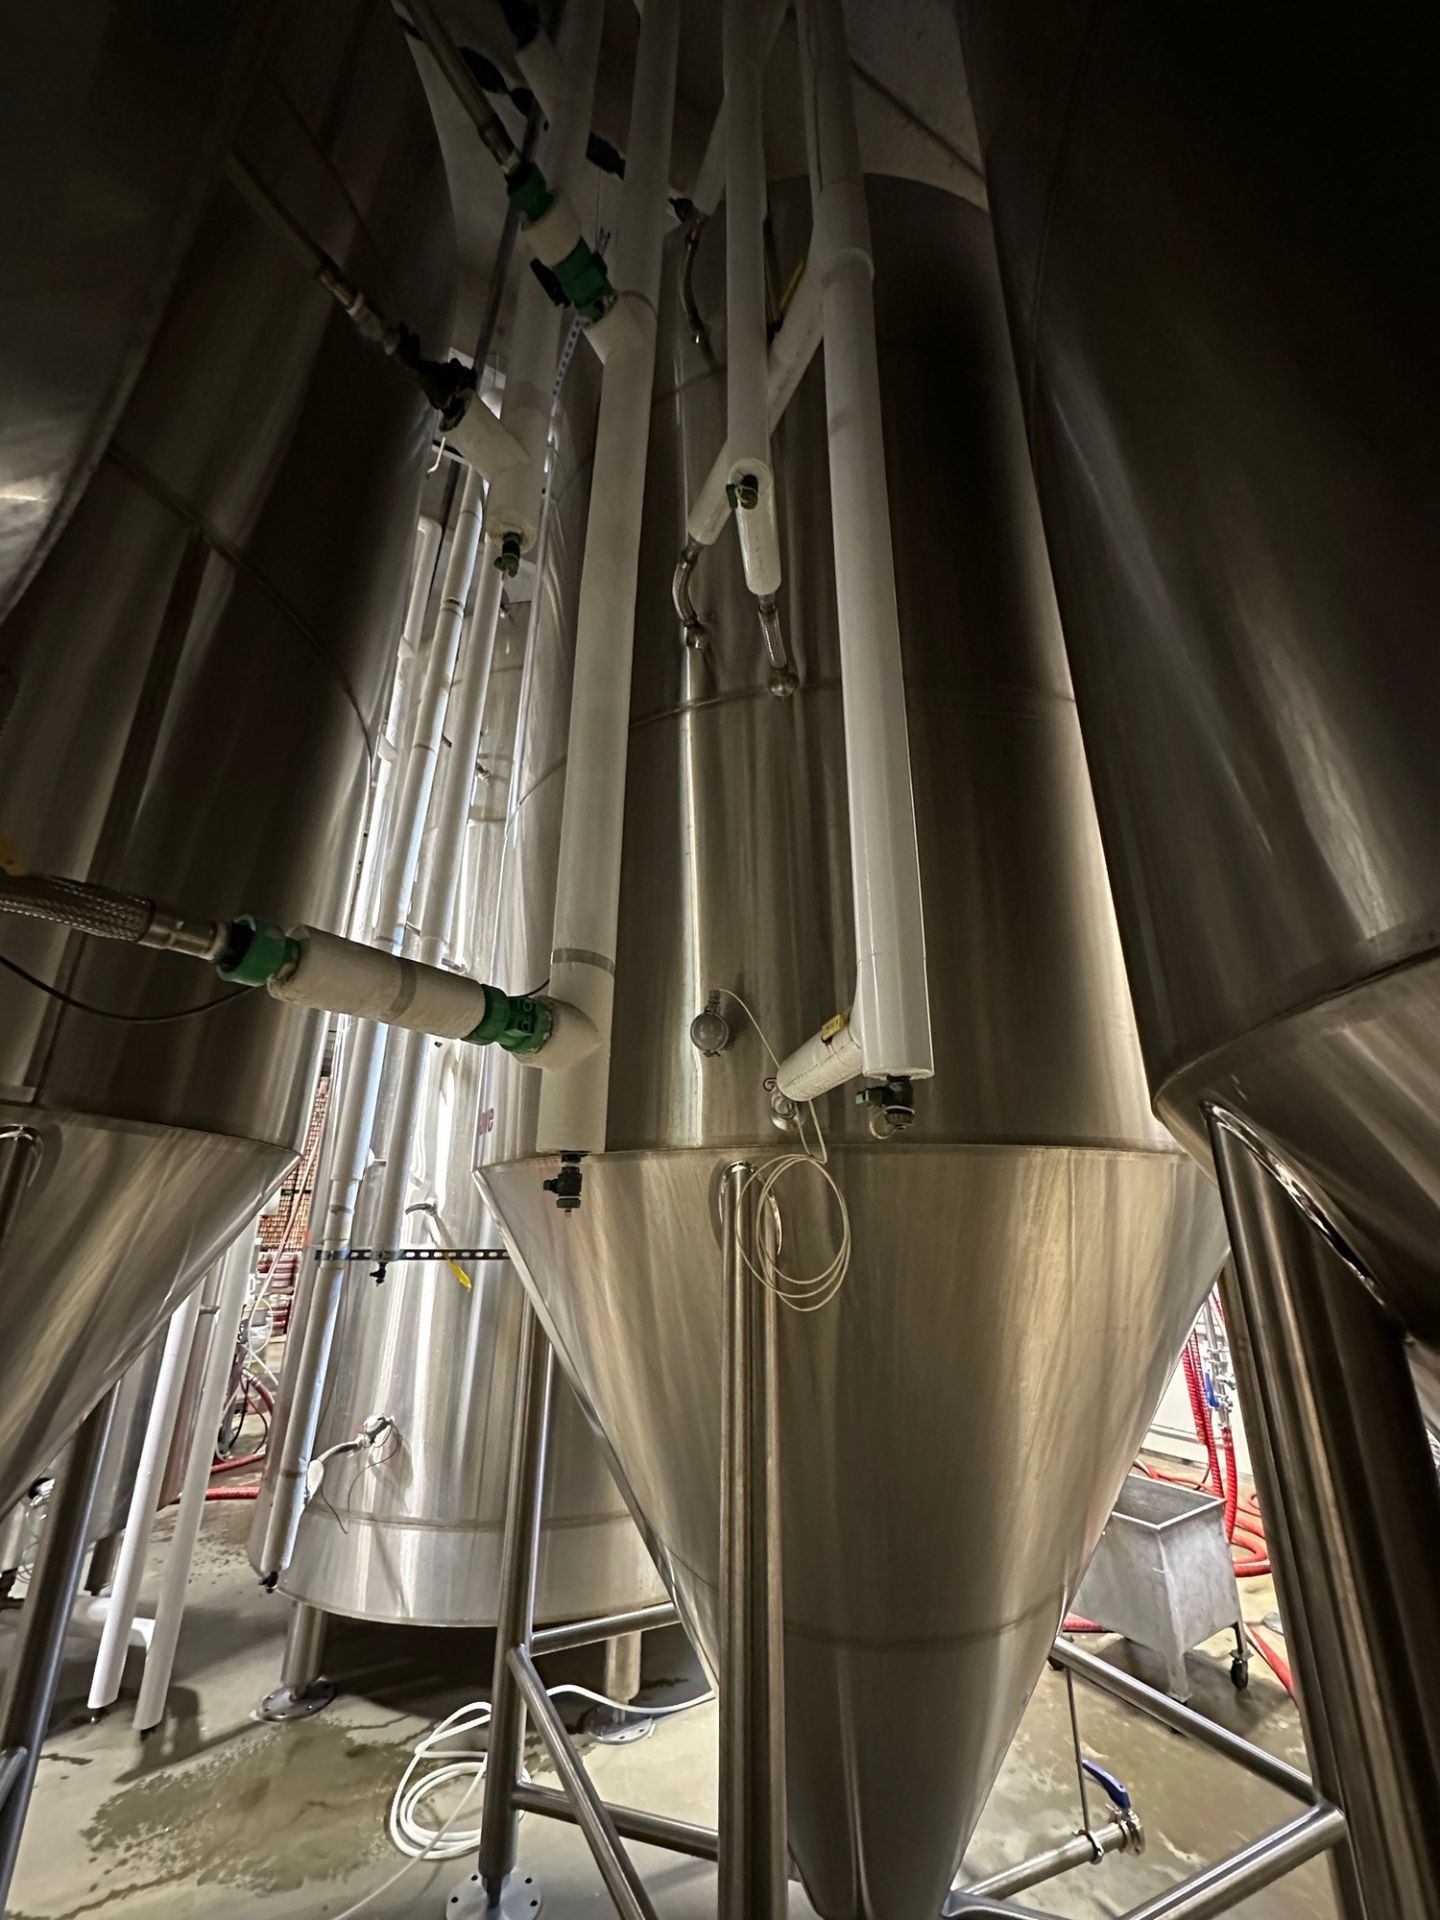 Silver State Stainless 120 BBL Stainless Steel Fermentation Tank - Cone Bottom, Gly | Rig Fee $2150 - Image 3 of 3